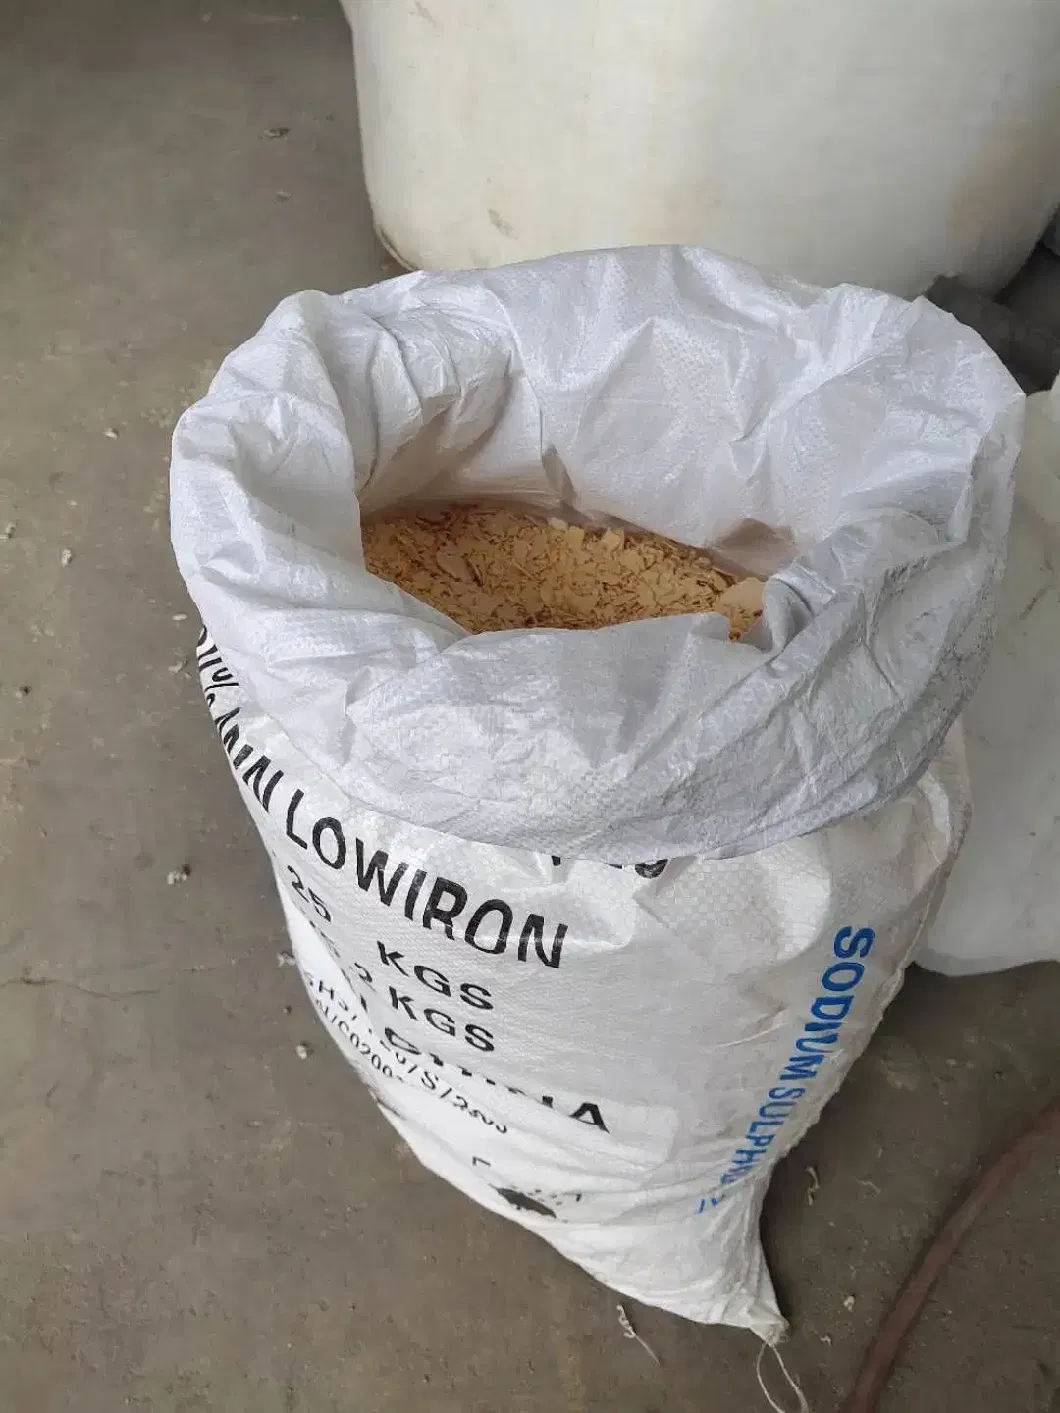 High Quality Sodium Sulfide 60%Min Yellow/Red Flakes for Leather Industry Chemical Material